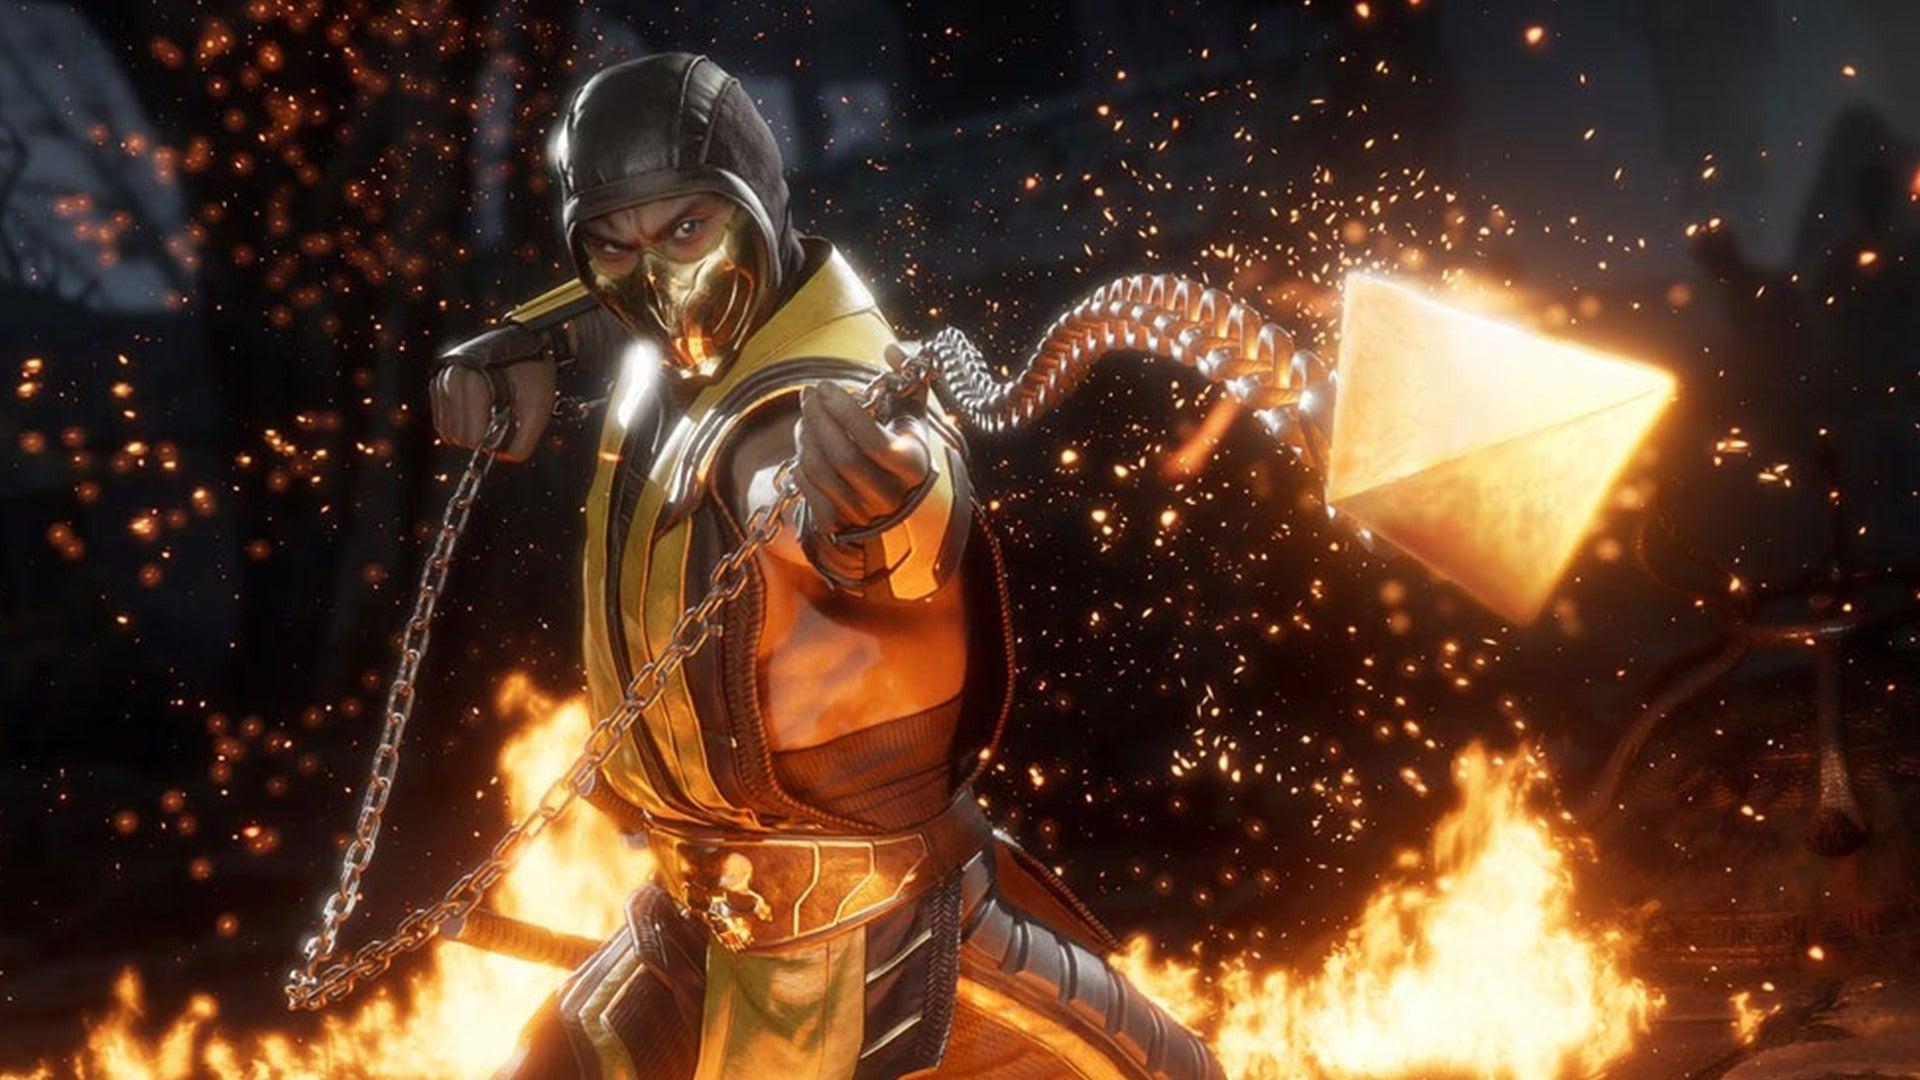 Mortal Kombat 11 Live Gameplay Reveal: Schedule and Livestream Times